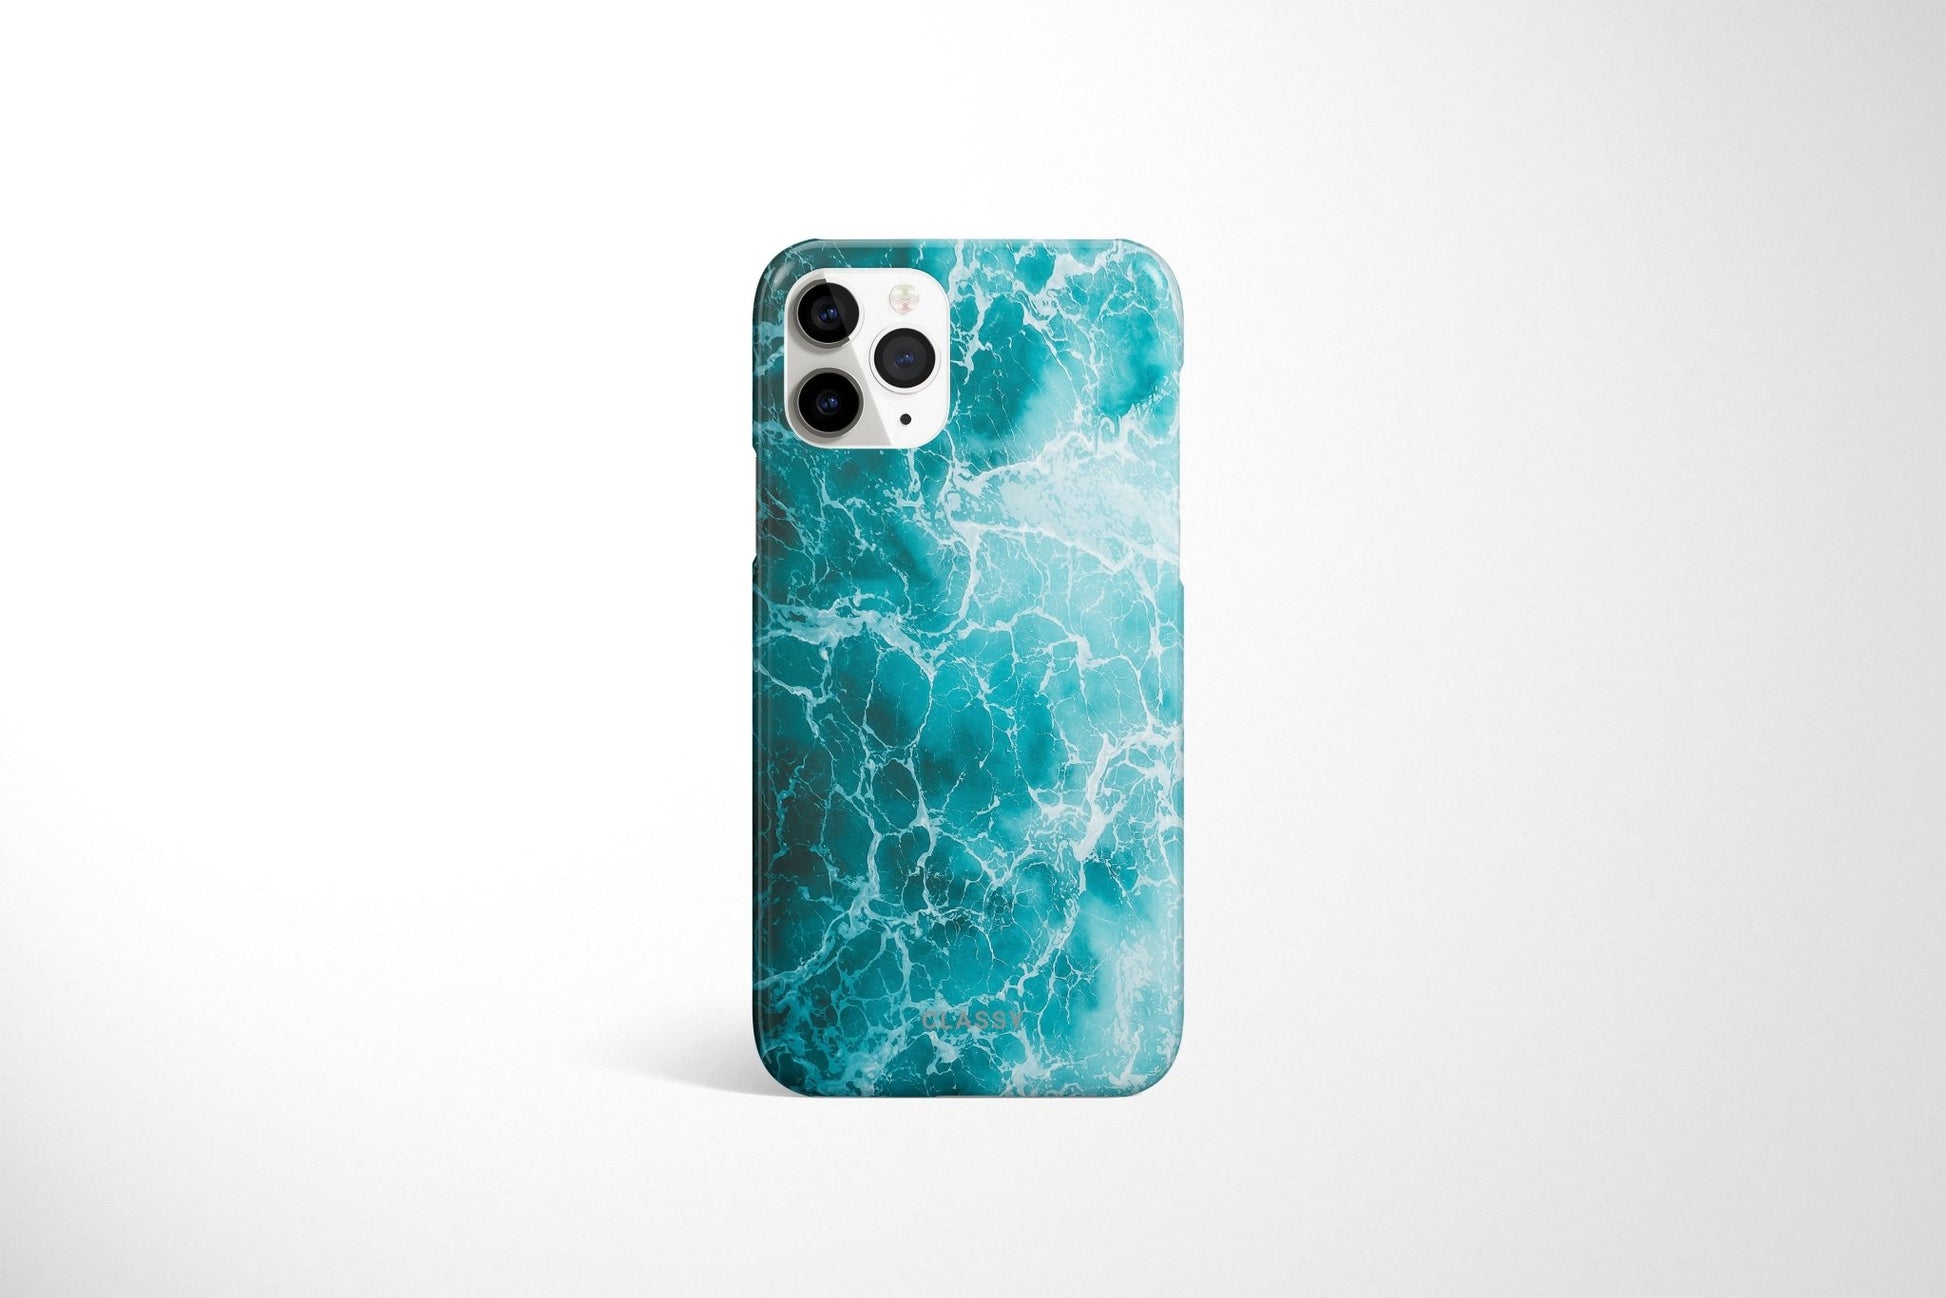 Ocean Breeze Snap Case - Classy Cases - Phone Case - iPhone 12 Pro Max - Glossy -